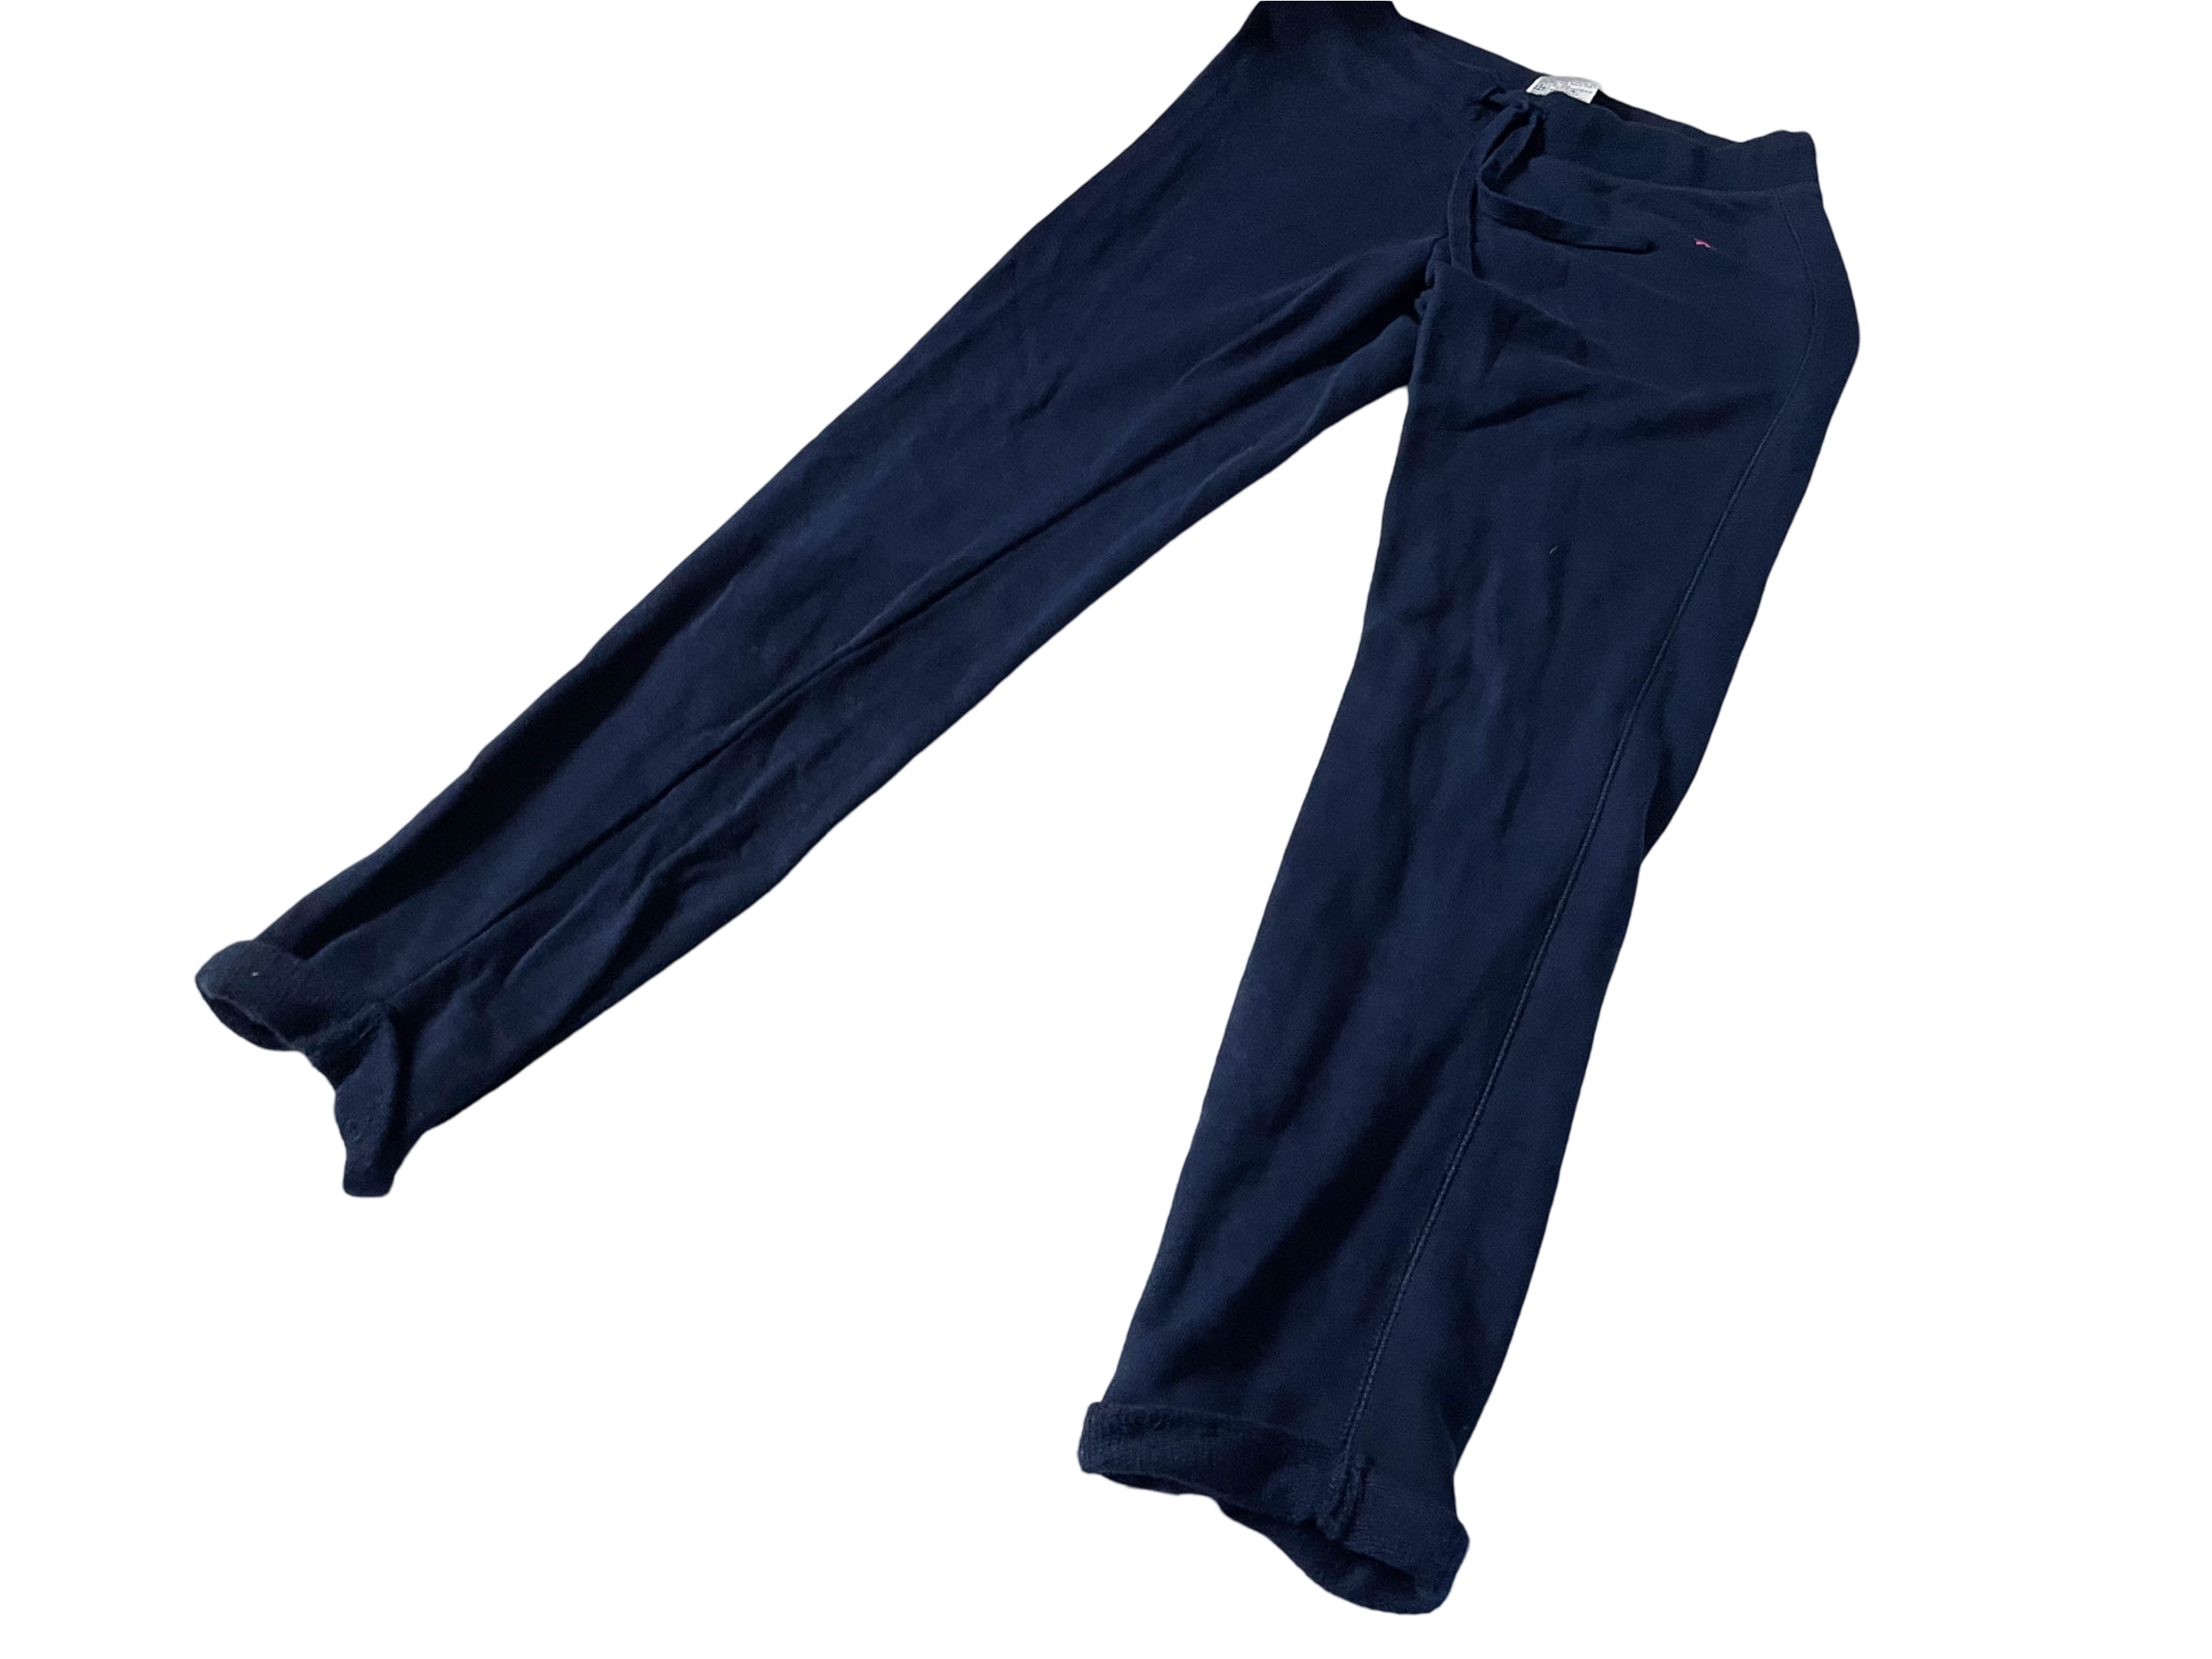 Vintage women's United color of Benetton navy sweat pant in XS |L23 W 22|SKU 4031